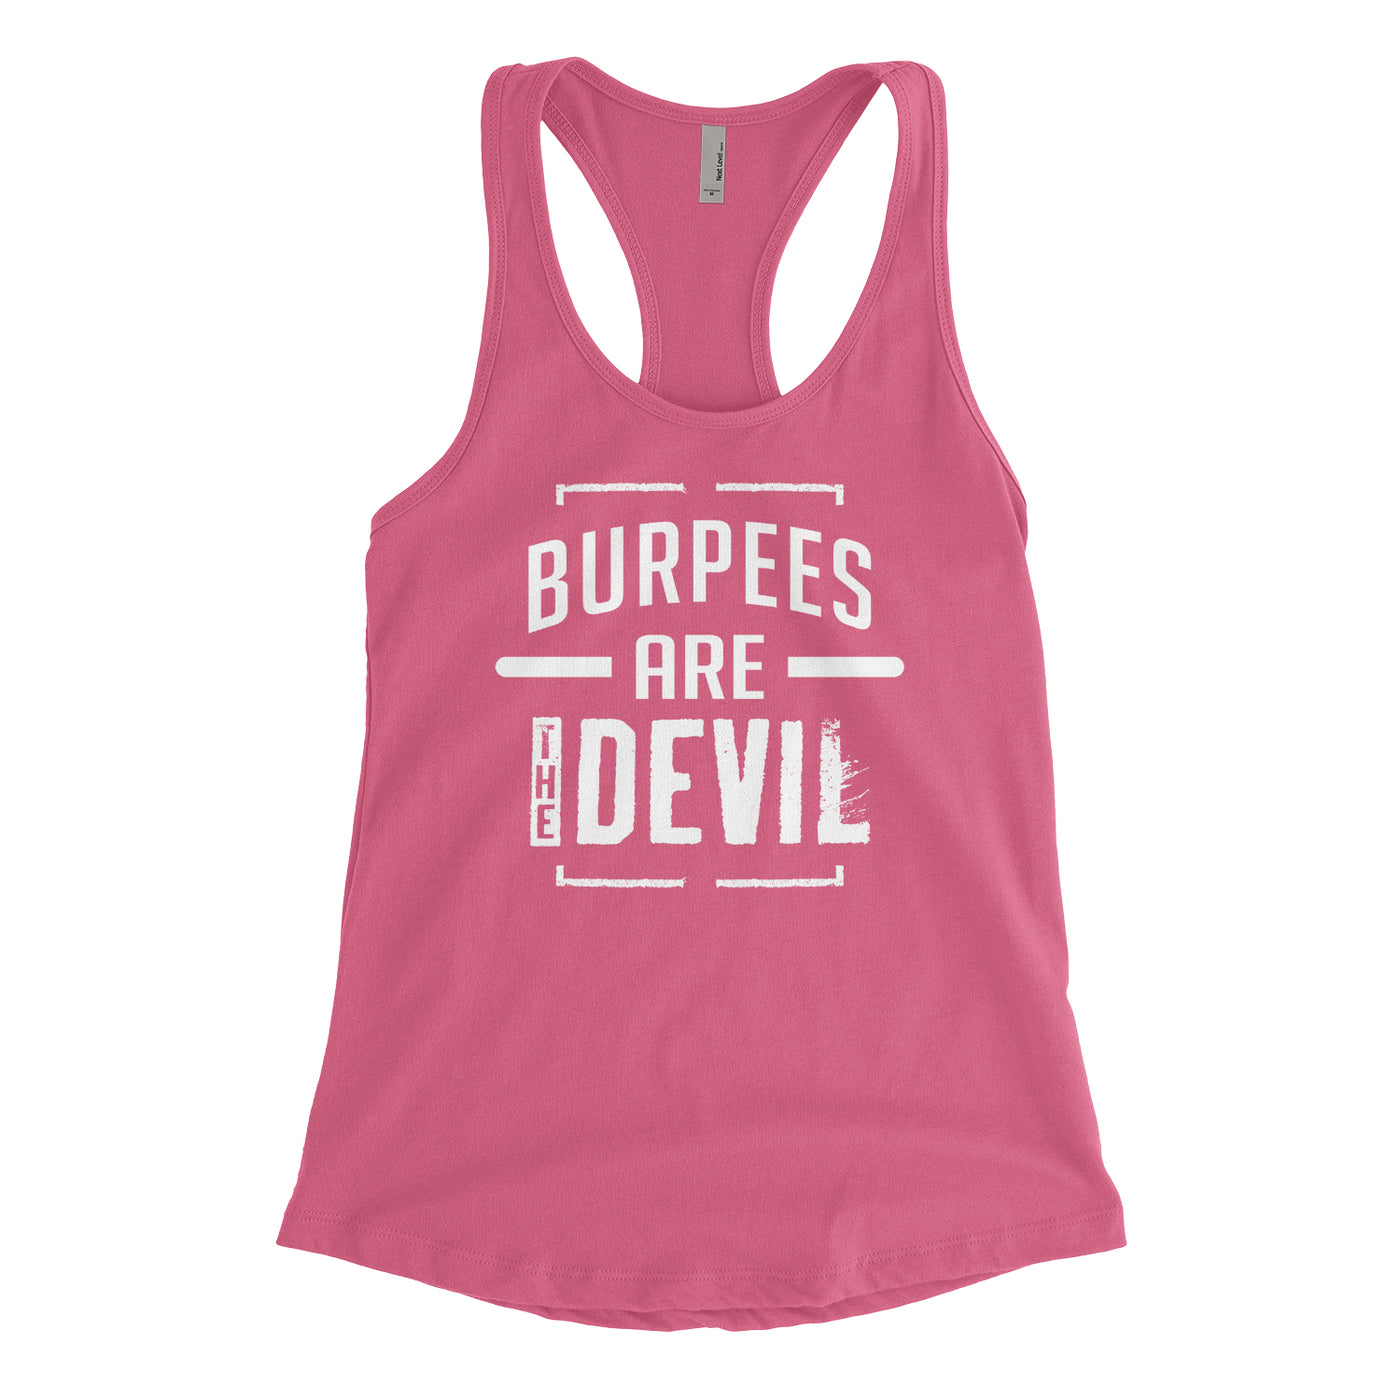 Burpees Are The Devil